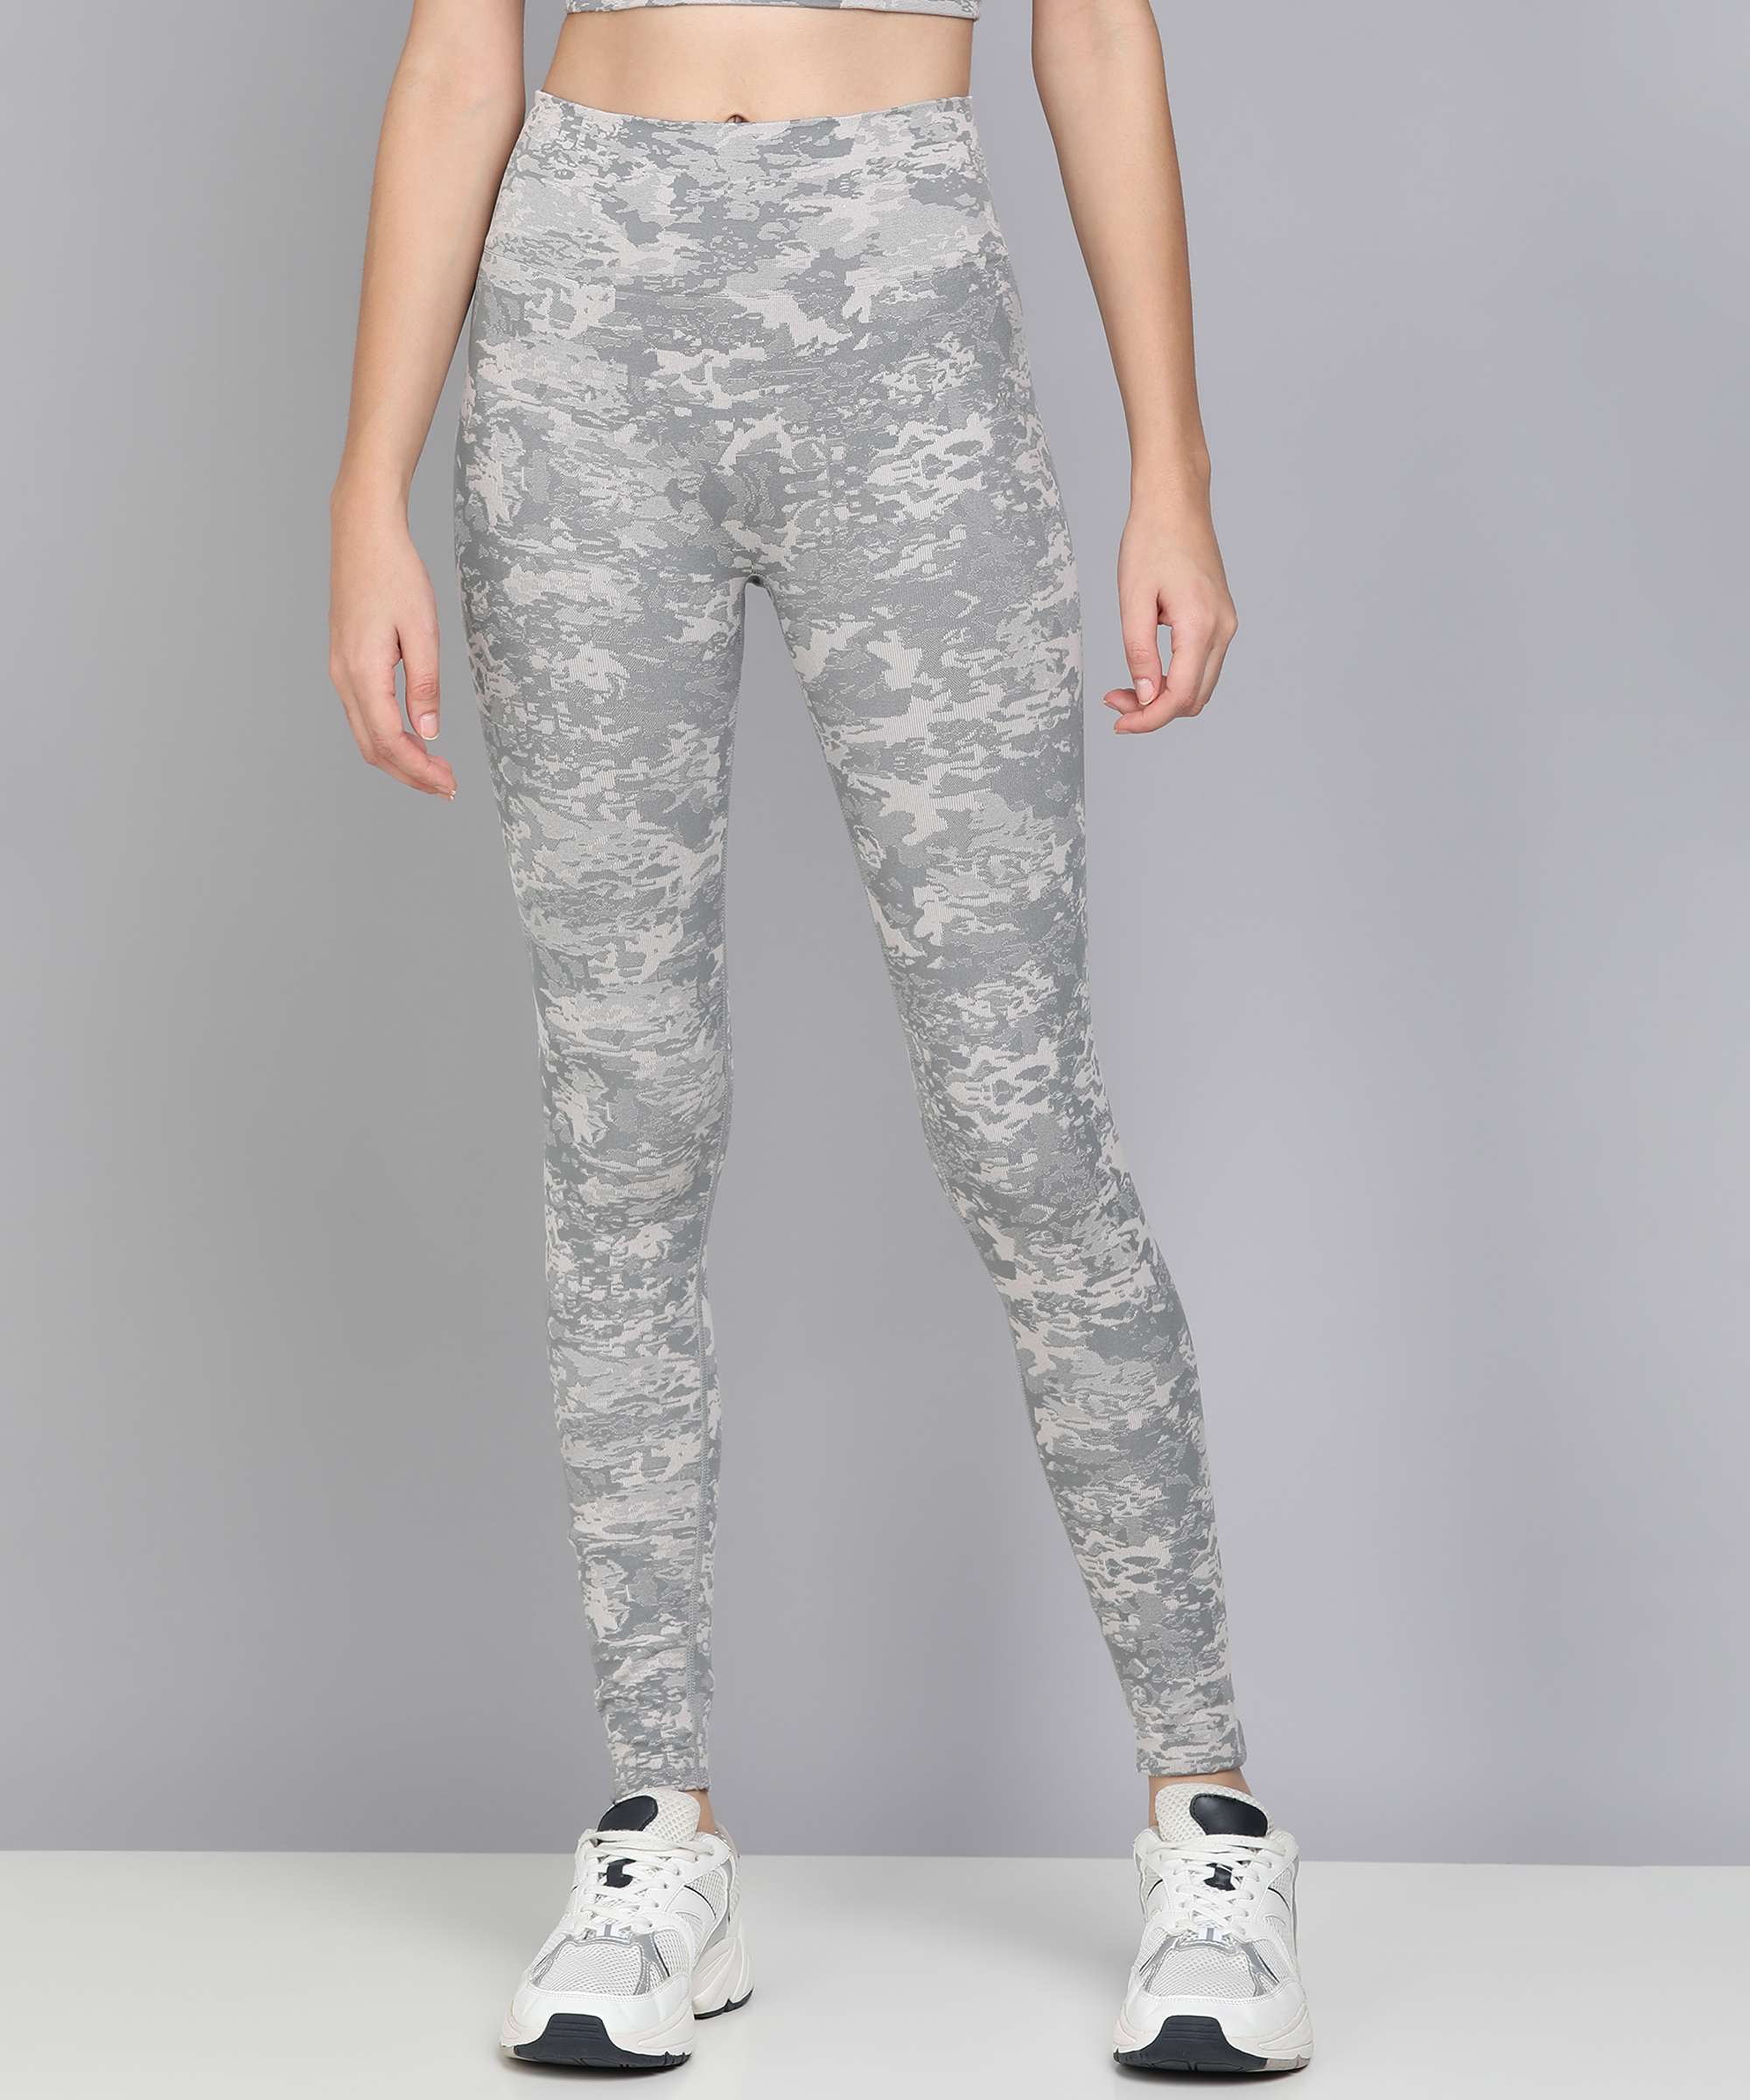 Seamless Camo Leggings - KOBO SPORTS - Exclusively Designed for Workouts